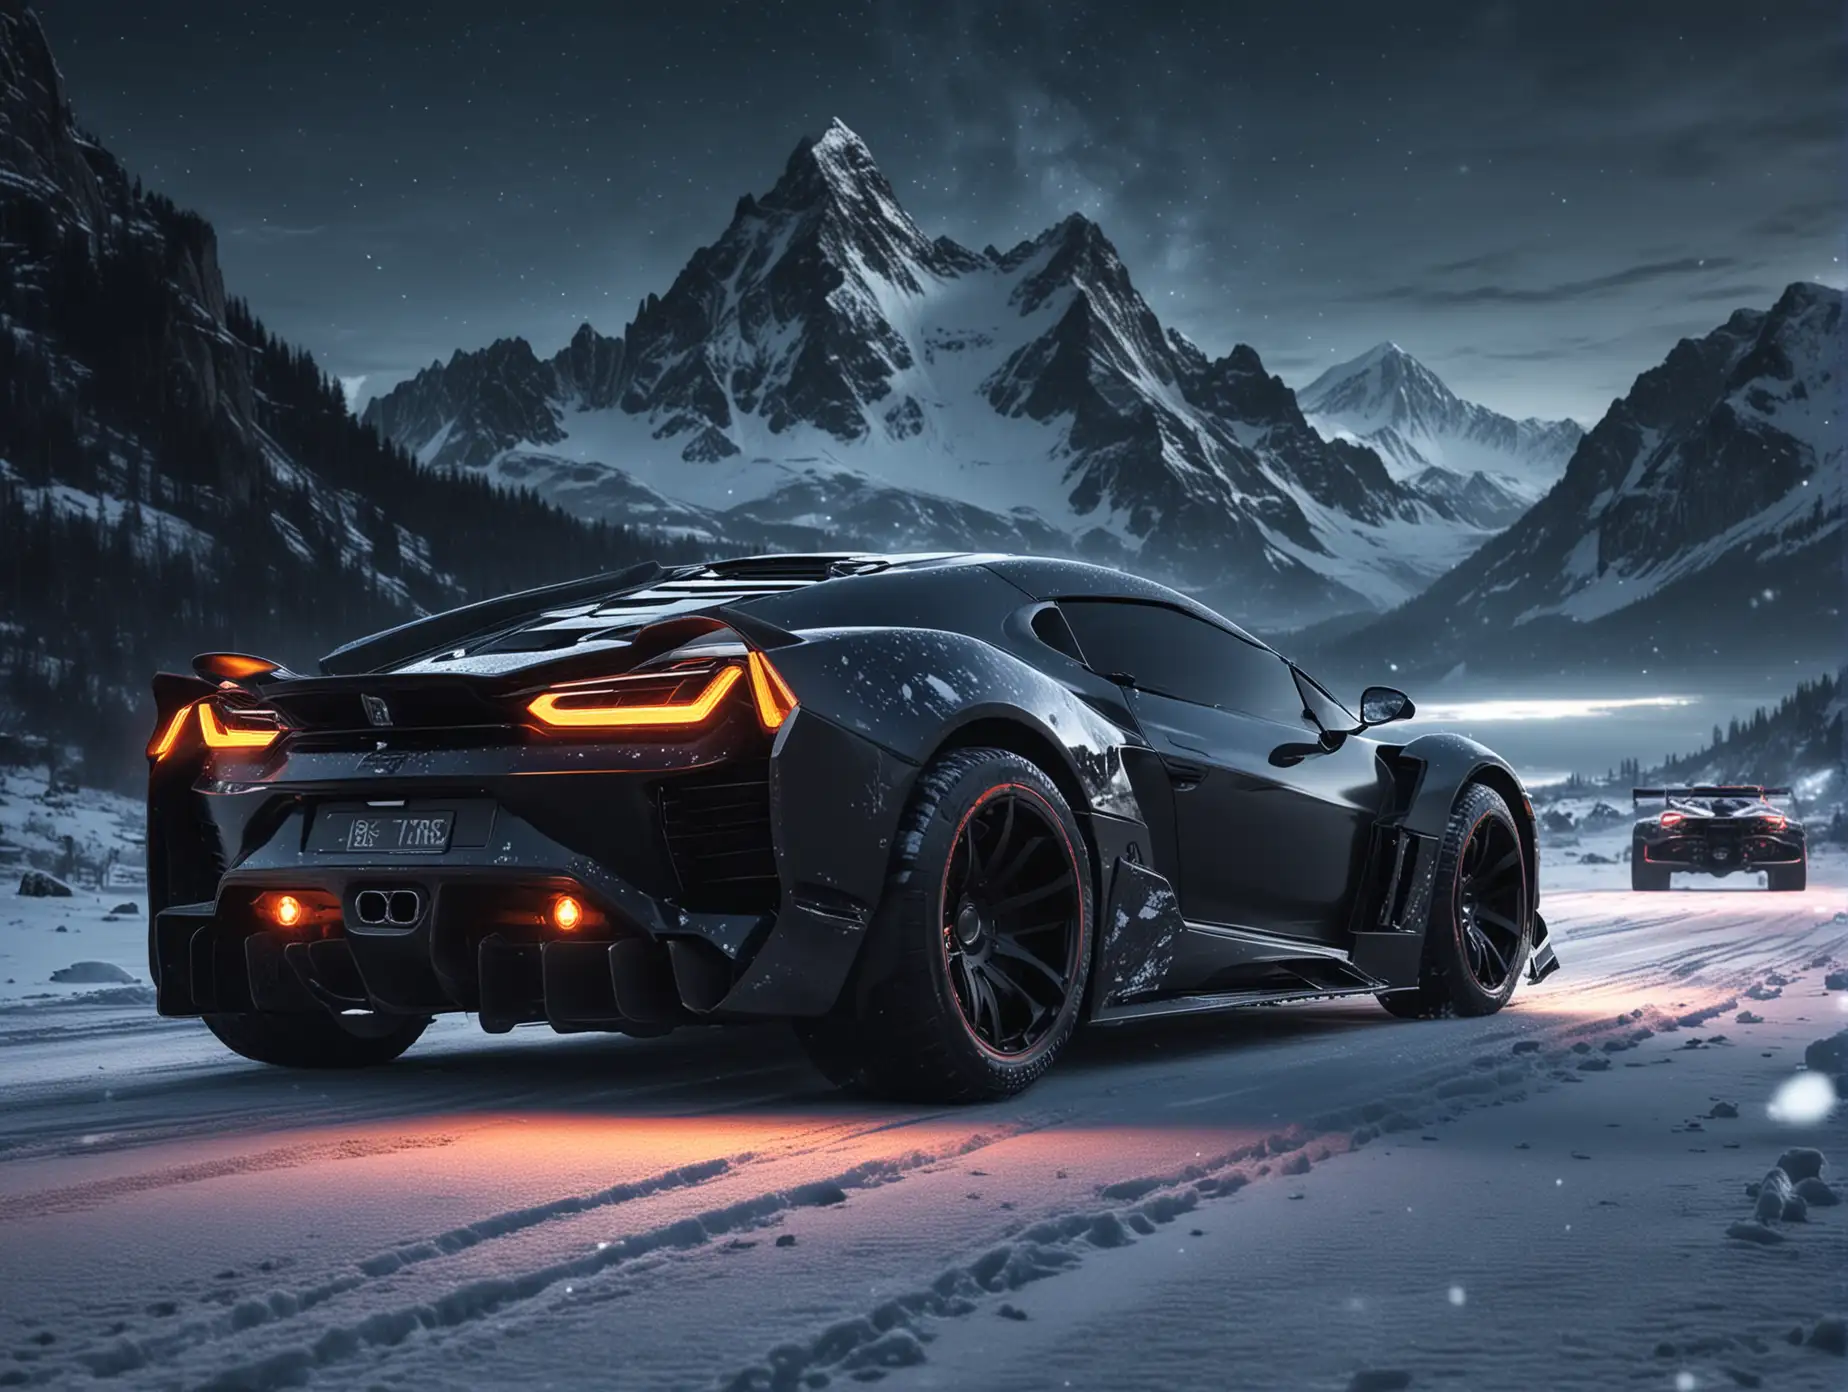 Futuristic-Concept-Sport-Cars-Monsters-Driving-at-Night-with-Mountain-Backdrop